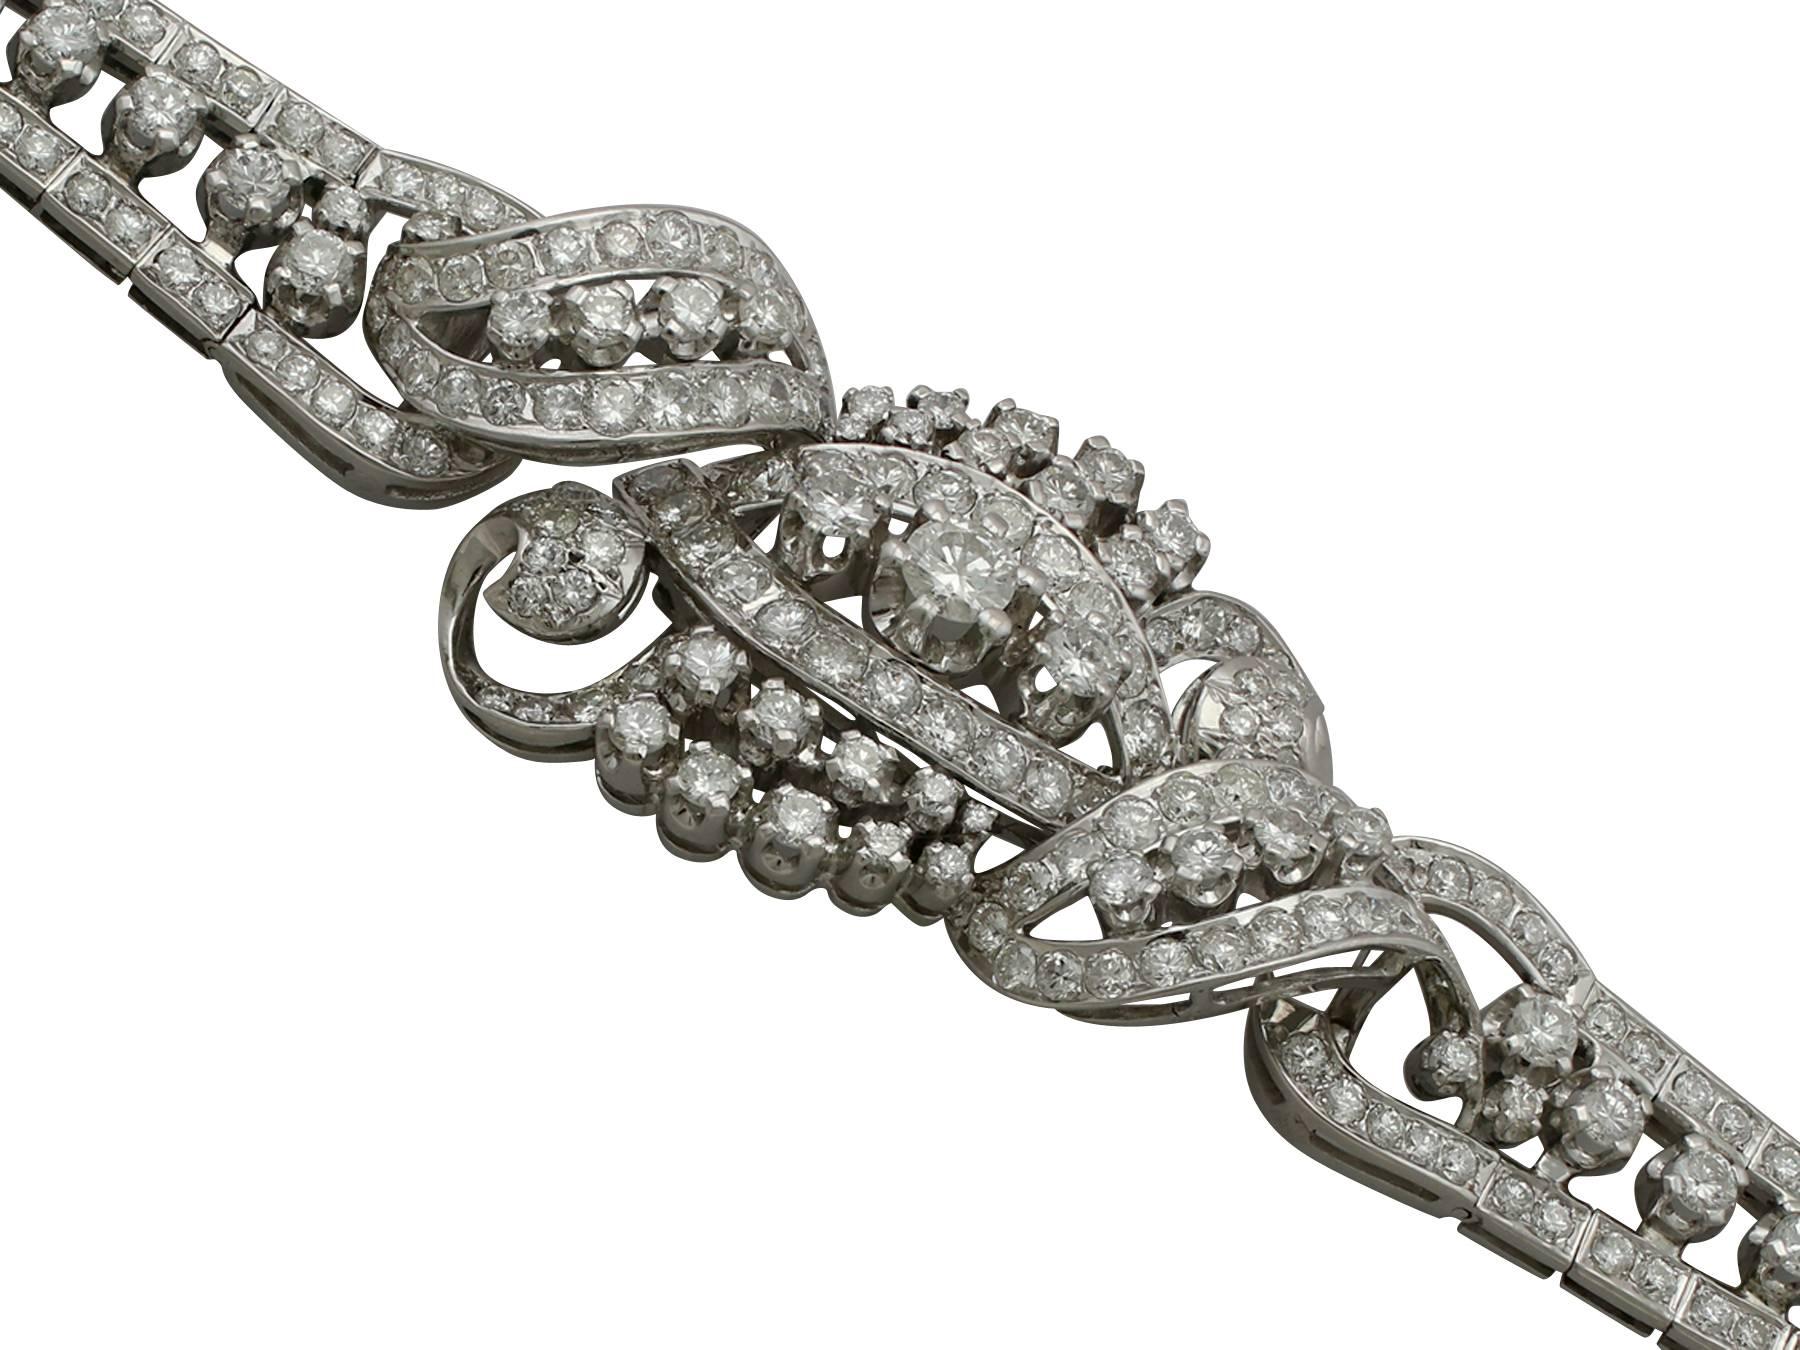 A stunning and impressive vintage Austrian 13.95 carat diamond and 18 karat white gold bracelet; part of our diverse vintage jewelry and estate jewelry collections

This stunning, fine and impressive luxury diamond bracelet has been crafted in 18 k